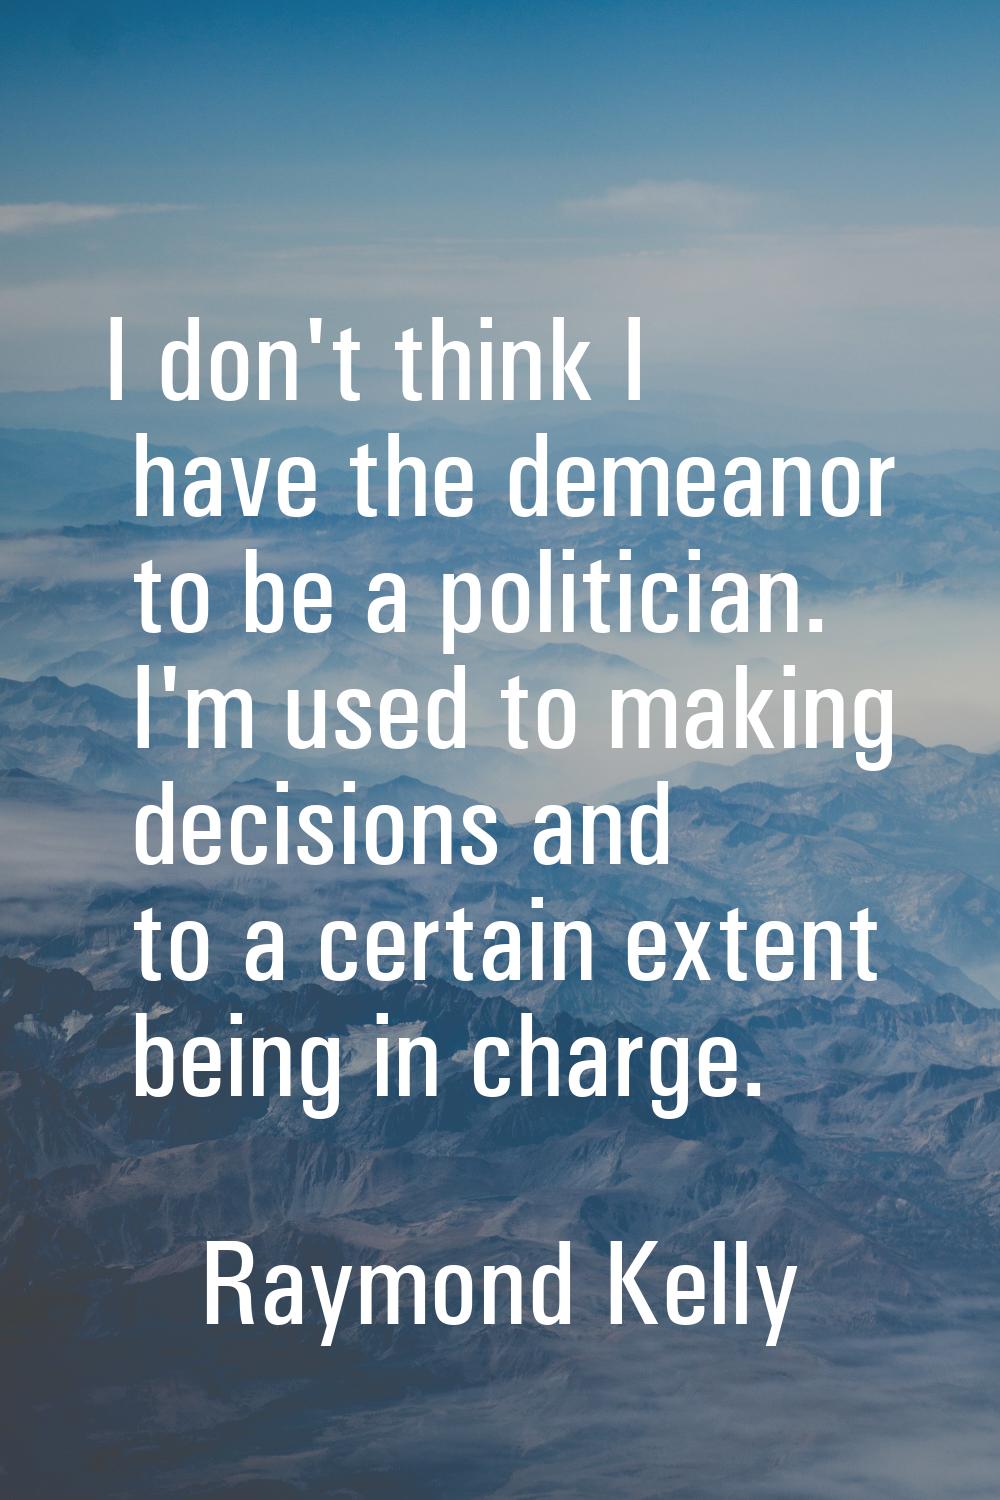 I don't think I have the demeanor to be a politician. I'm used to making decisions and to a certain